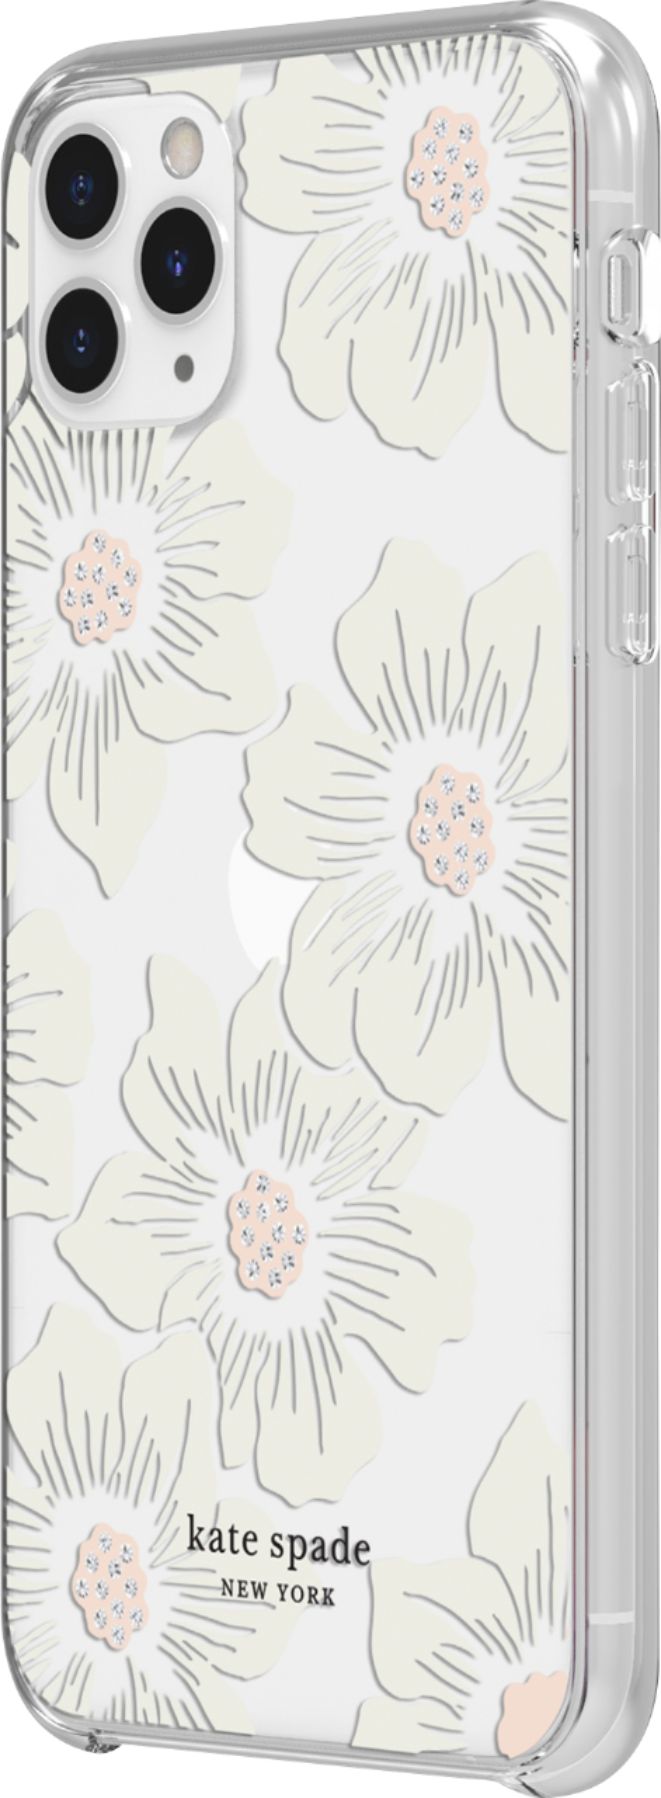 Left View: kate spade new york - Protective Hard Shell Case for Apple® iPhone® 11 Pro Max - Cream With Stones/Hollyhock Floral Clear